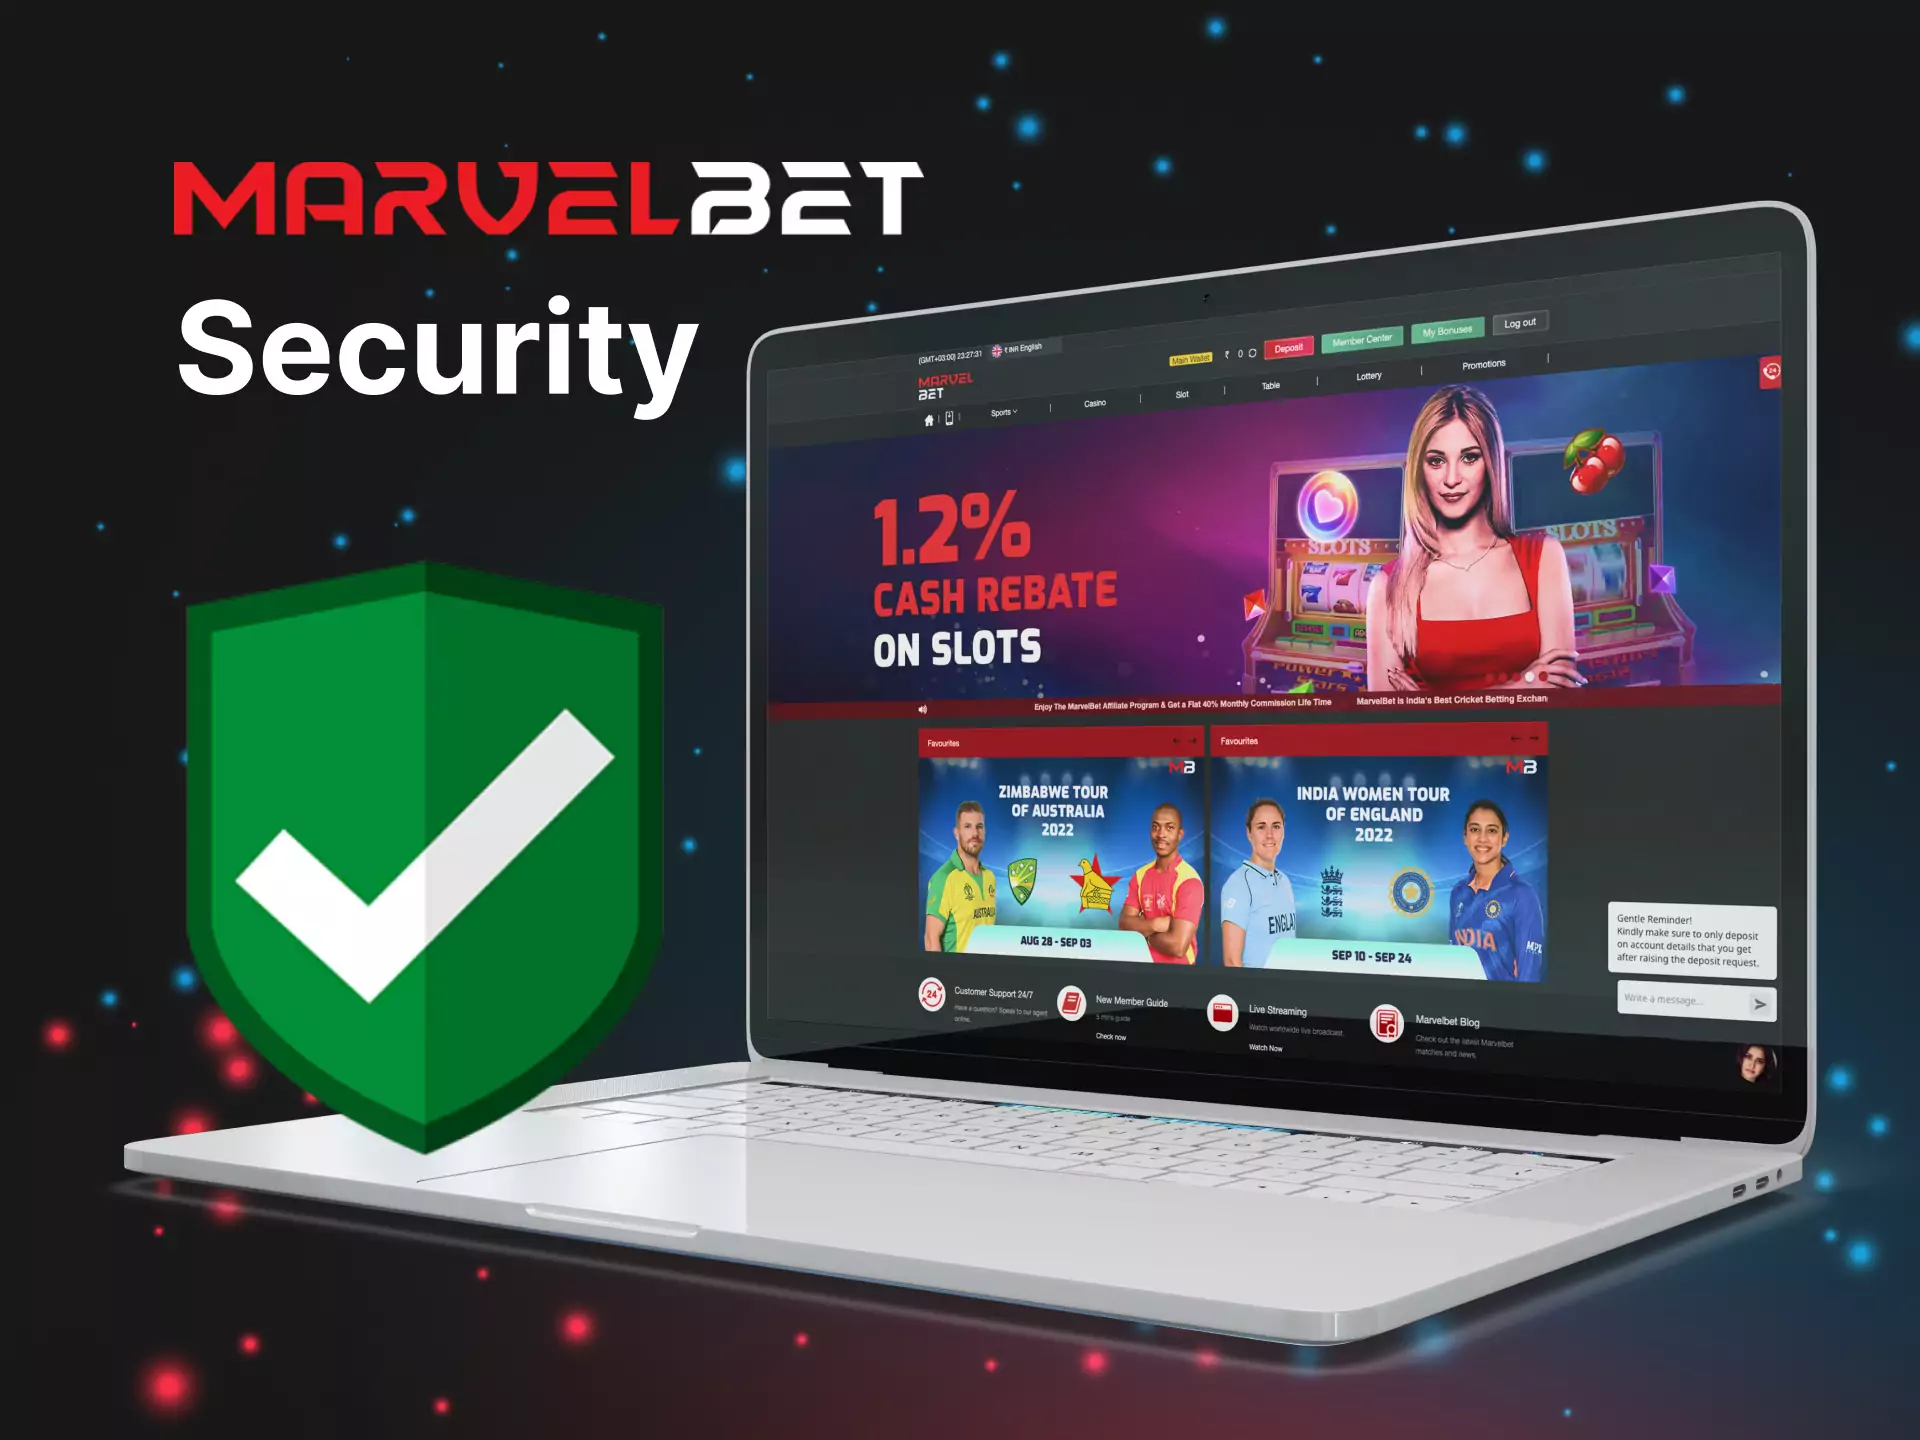 The Marvelbet official website works legally and is secure for users.